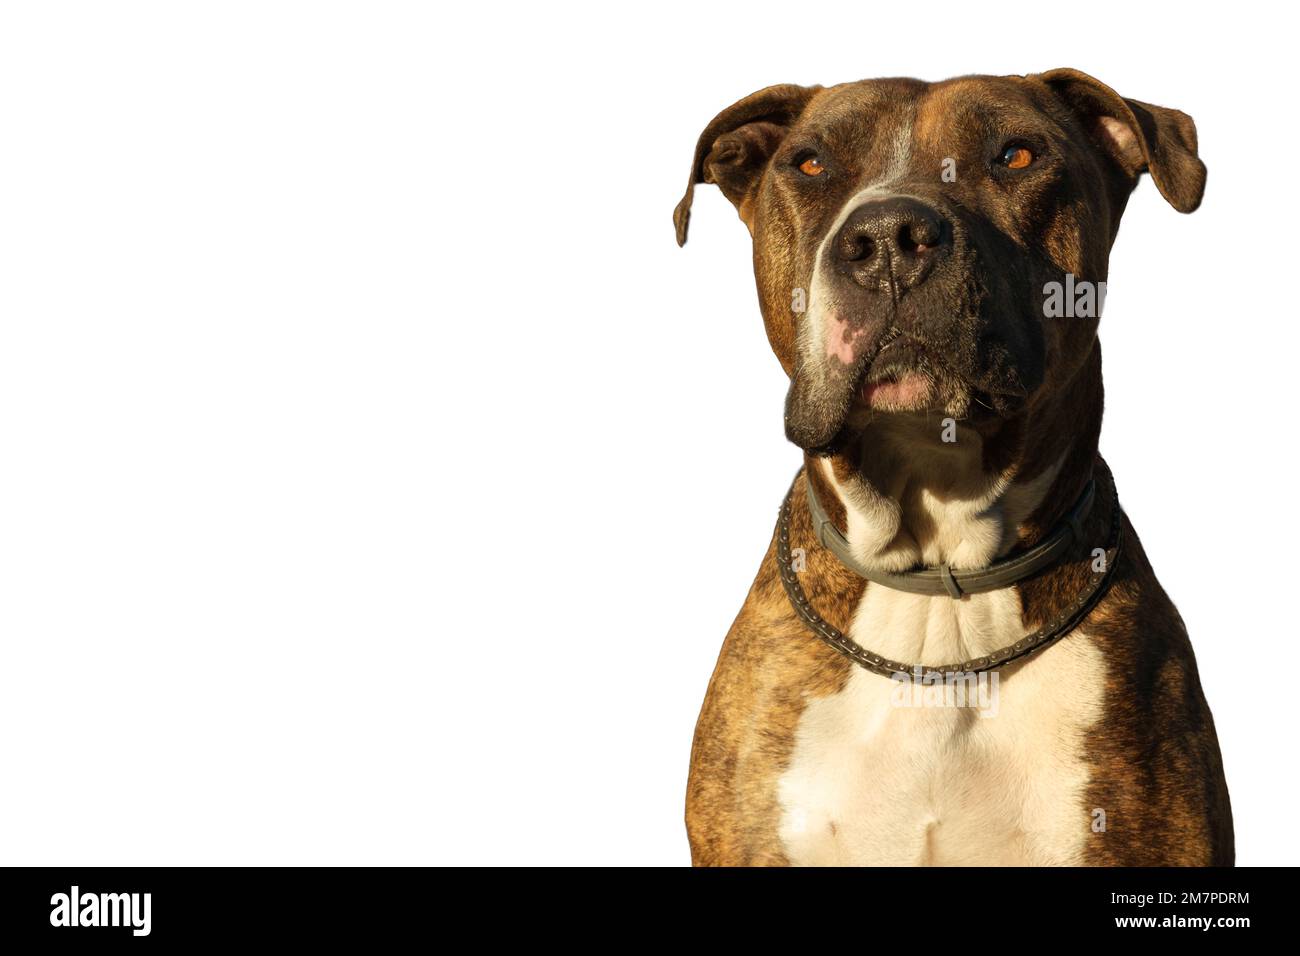 Portrait of a Pitbull dog on a white background he has a facial paralysis on a white background Stock Photo